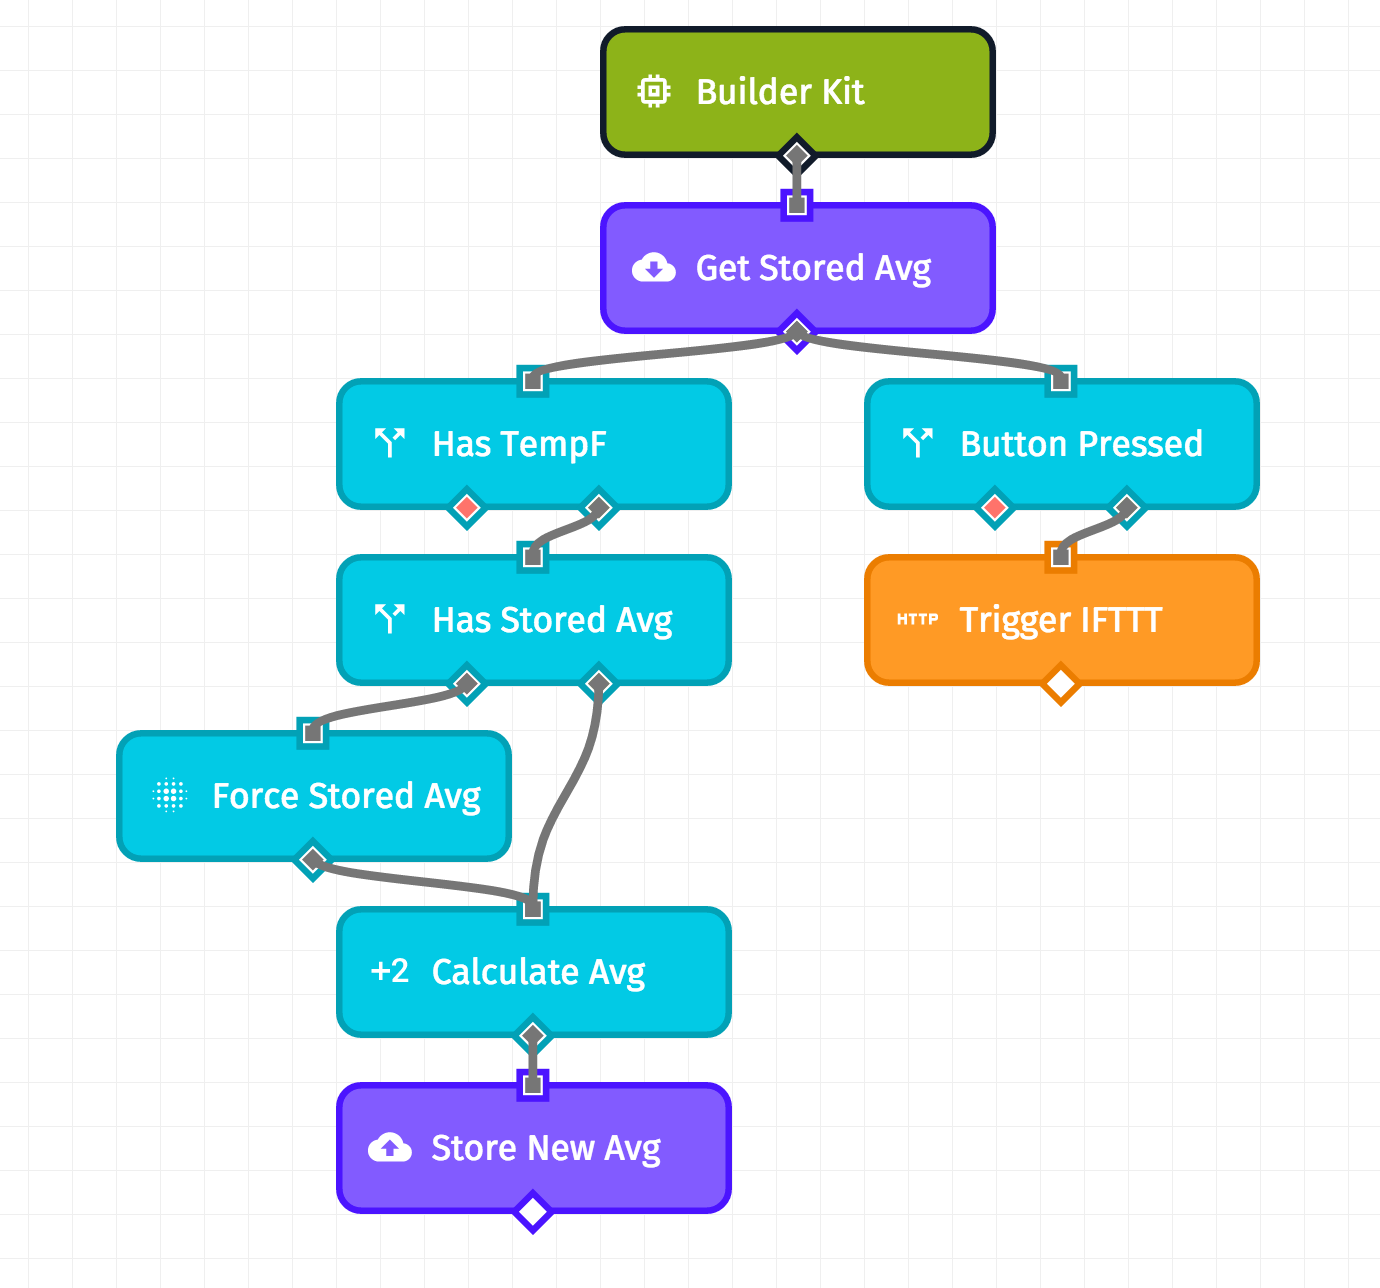 Workflow for tracking Rolling Average with a Trigger IFTTT node in Losant IoT platform.